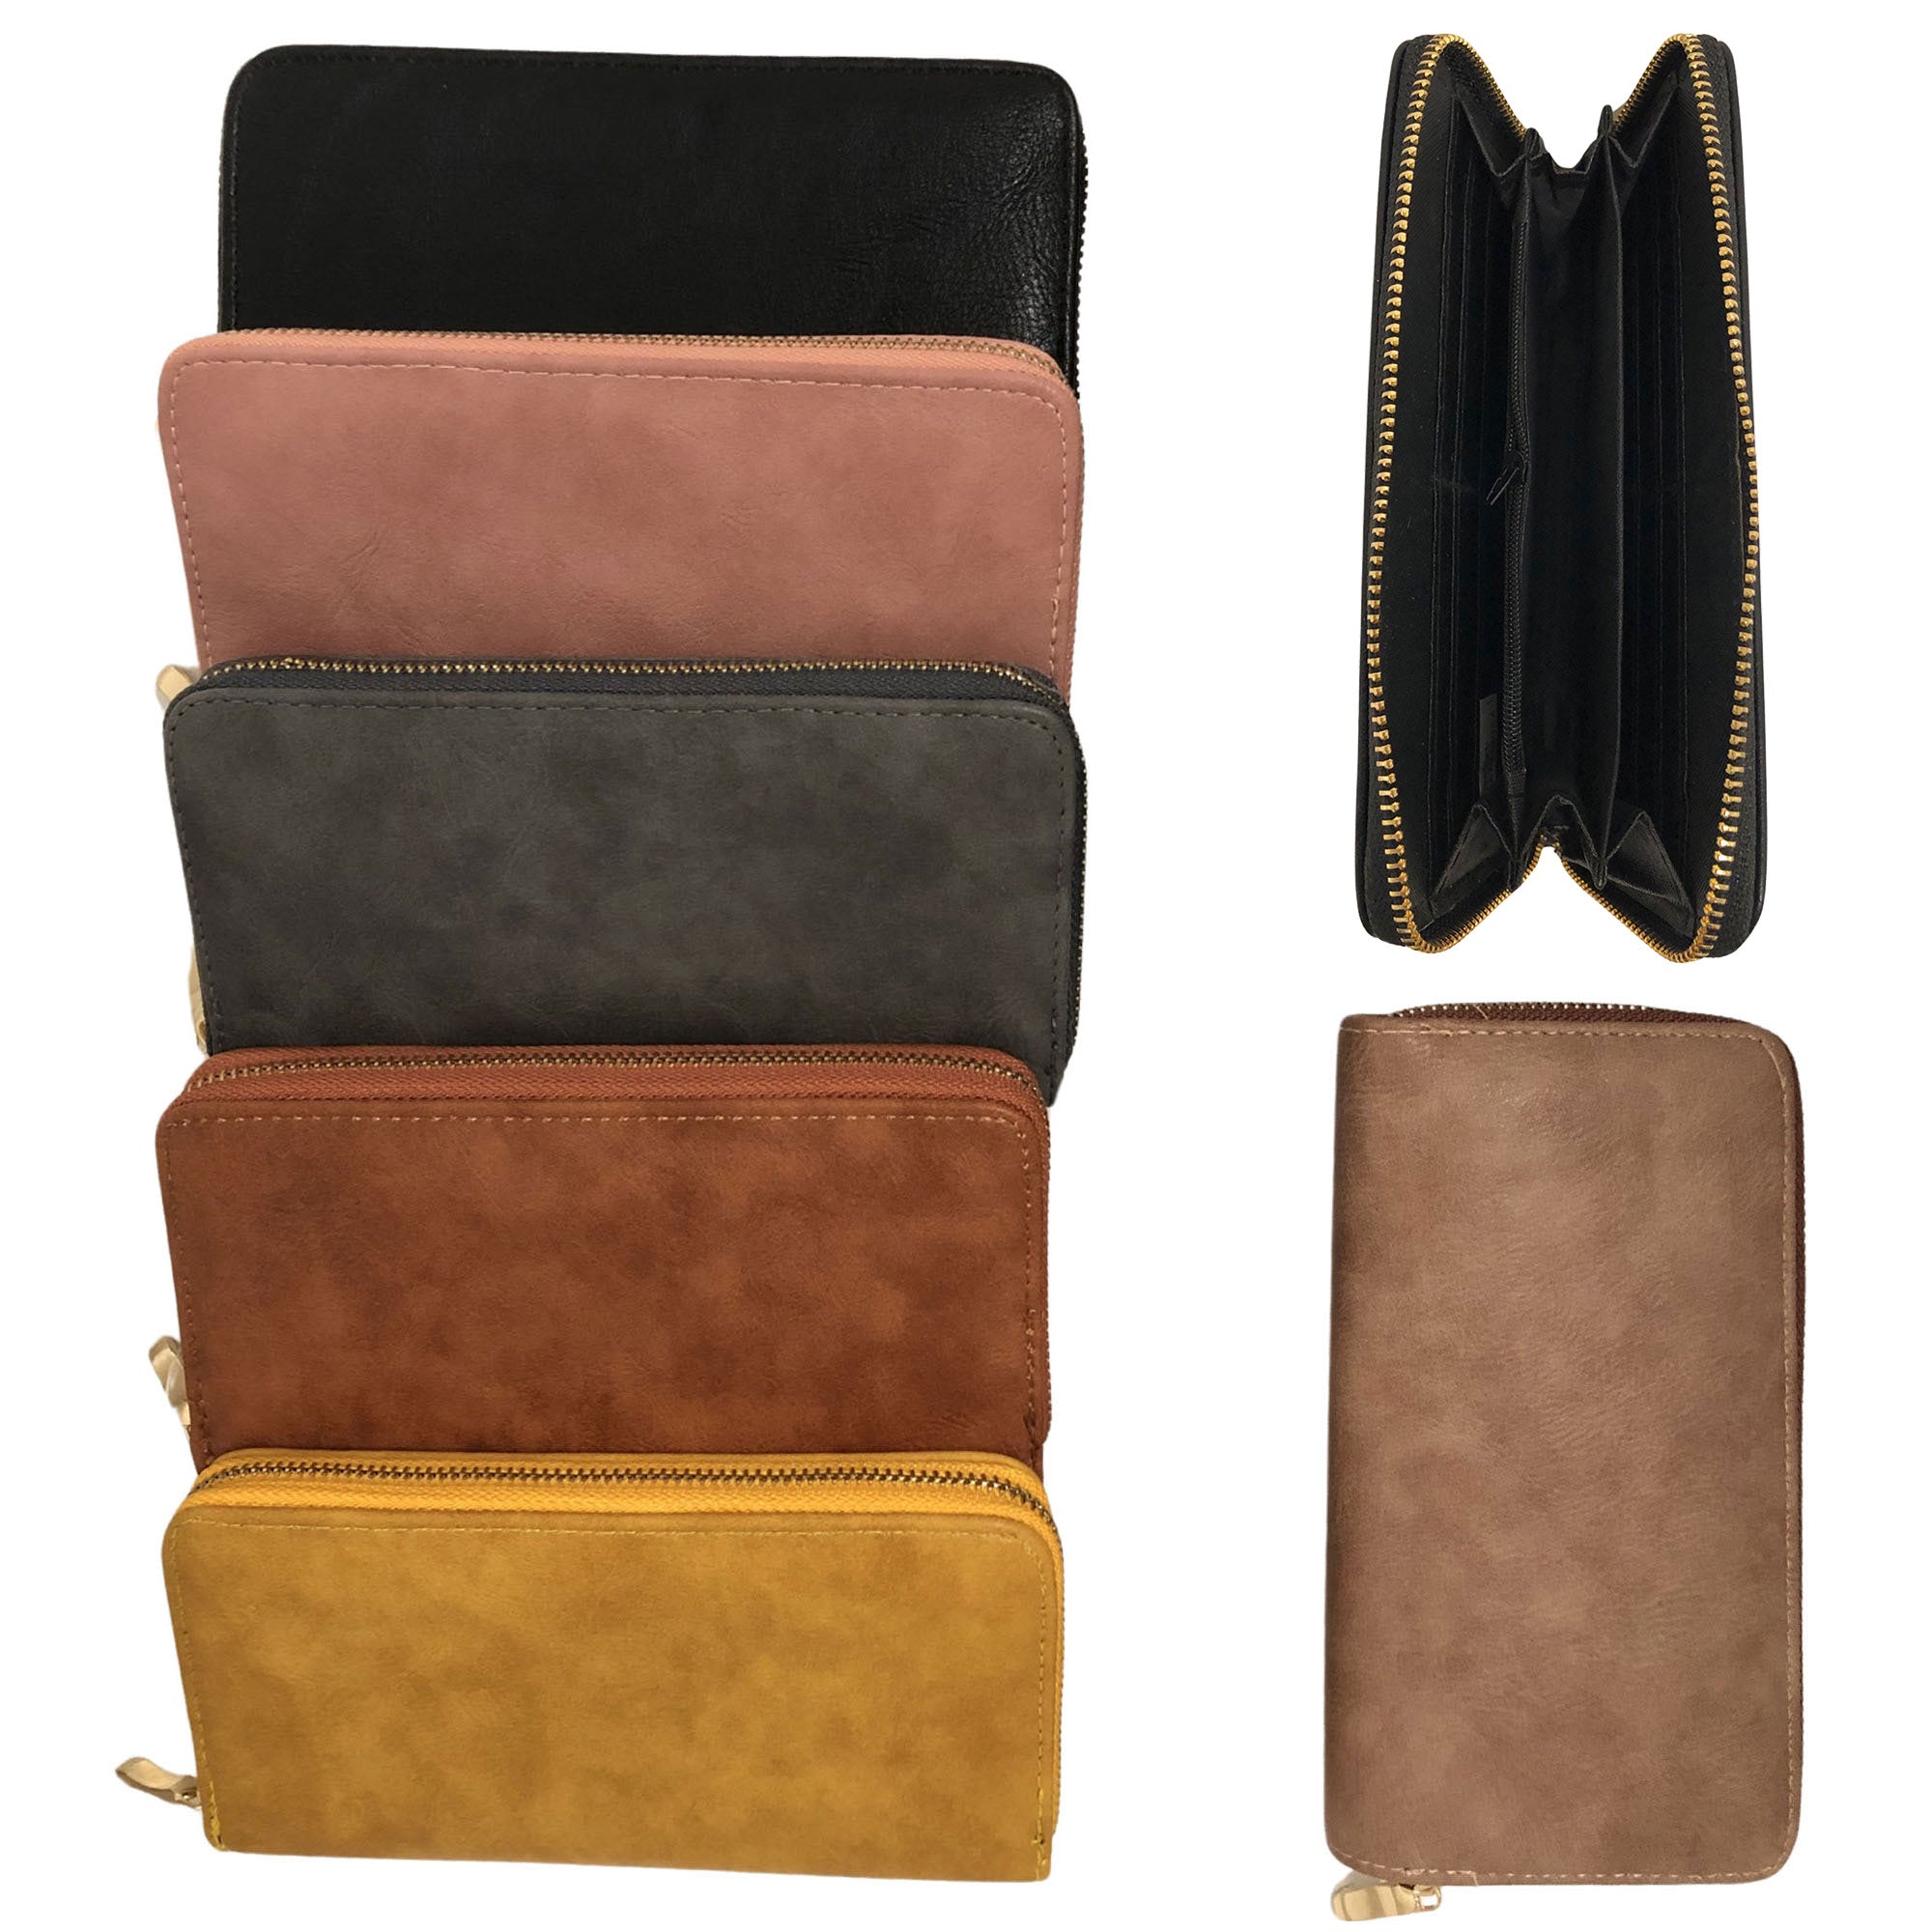 CLEARANCE WALLETS FOR WOMEN ASSORTED COLORS (CASE OF 36 - $2.00 / PIECE) - Wholesale Wallets for Women | SKU: 762-LEATHER-36